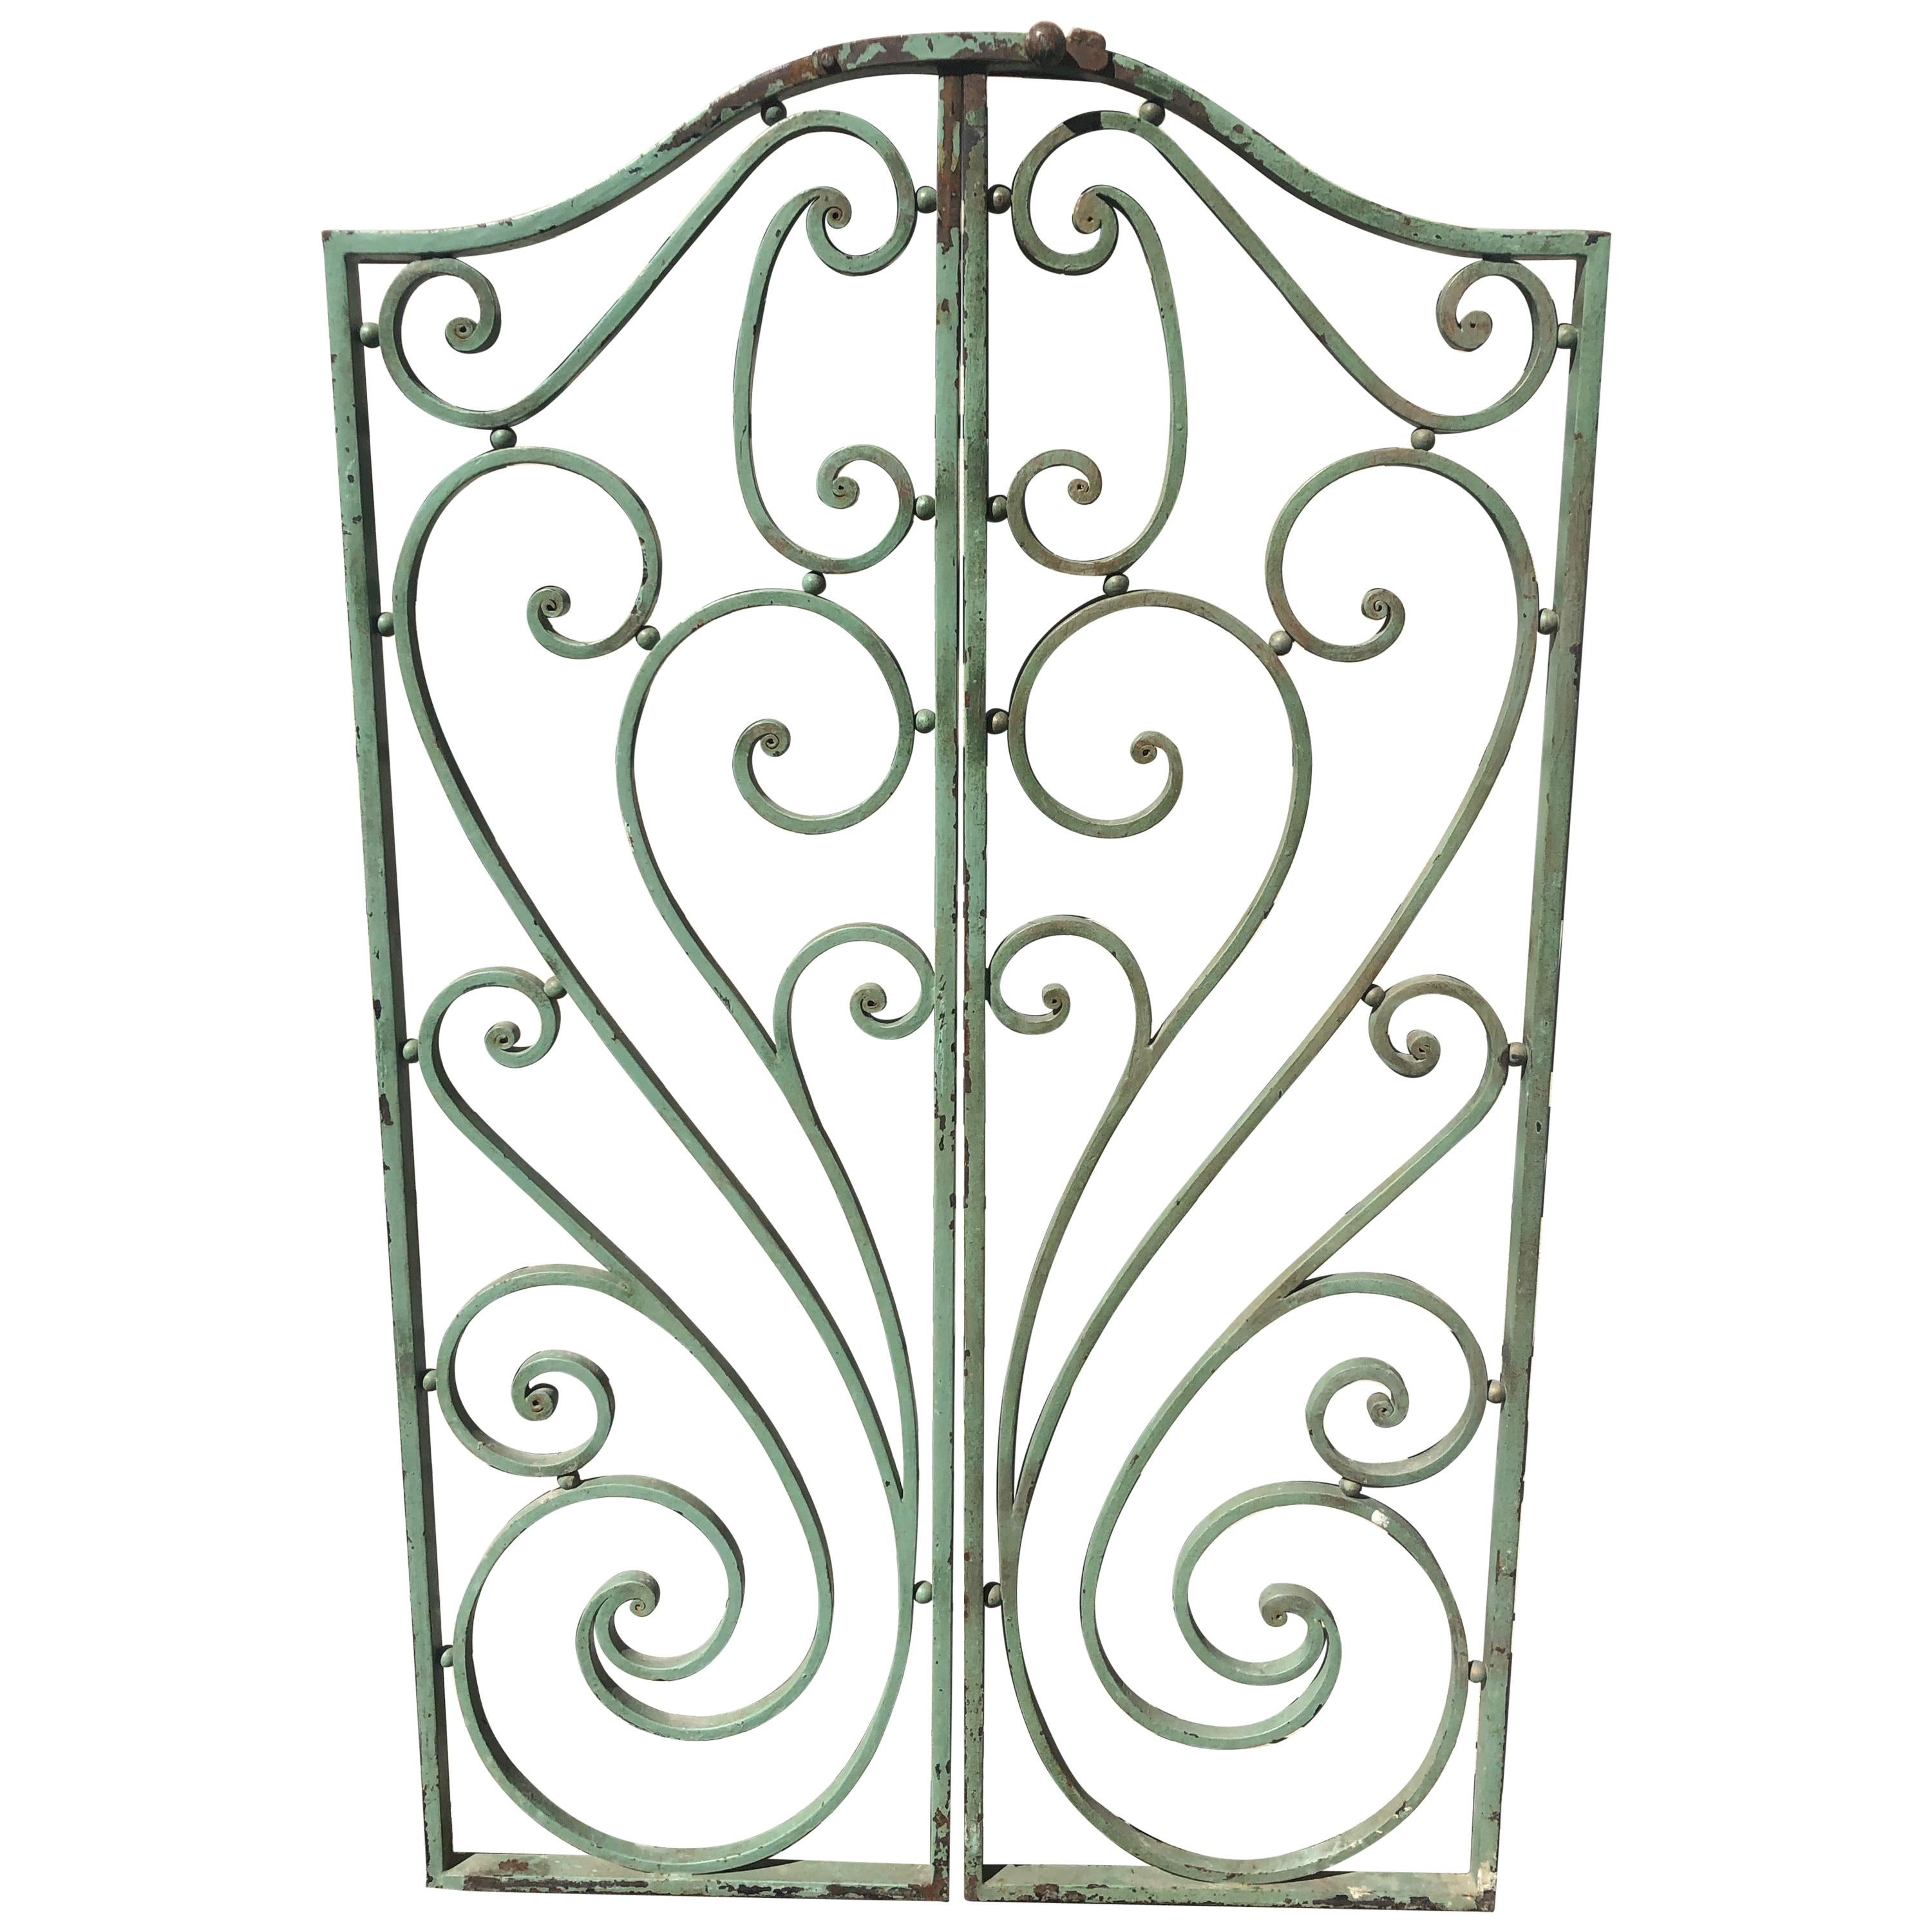 Pair of French Wrought Iron Beaux Arts-Style Gates with Mounting Hardware #1